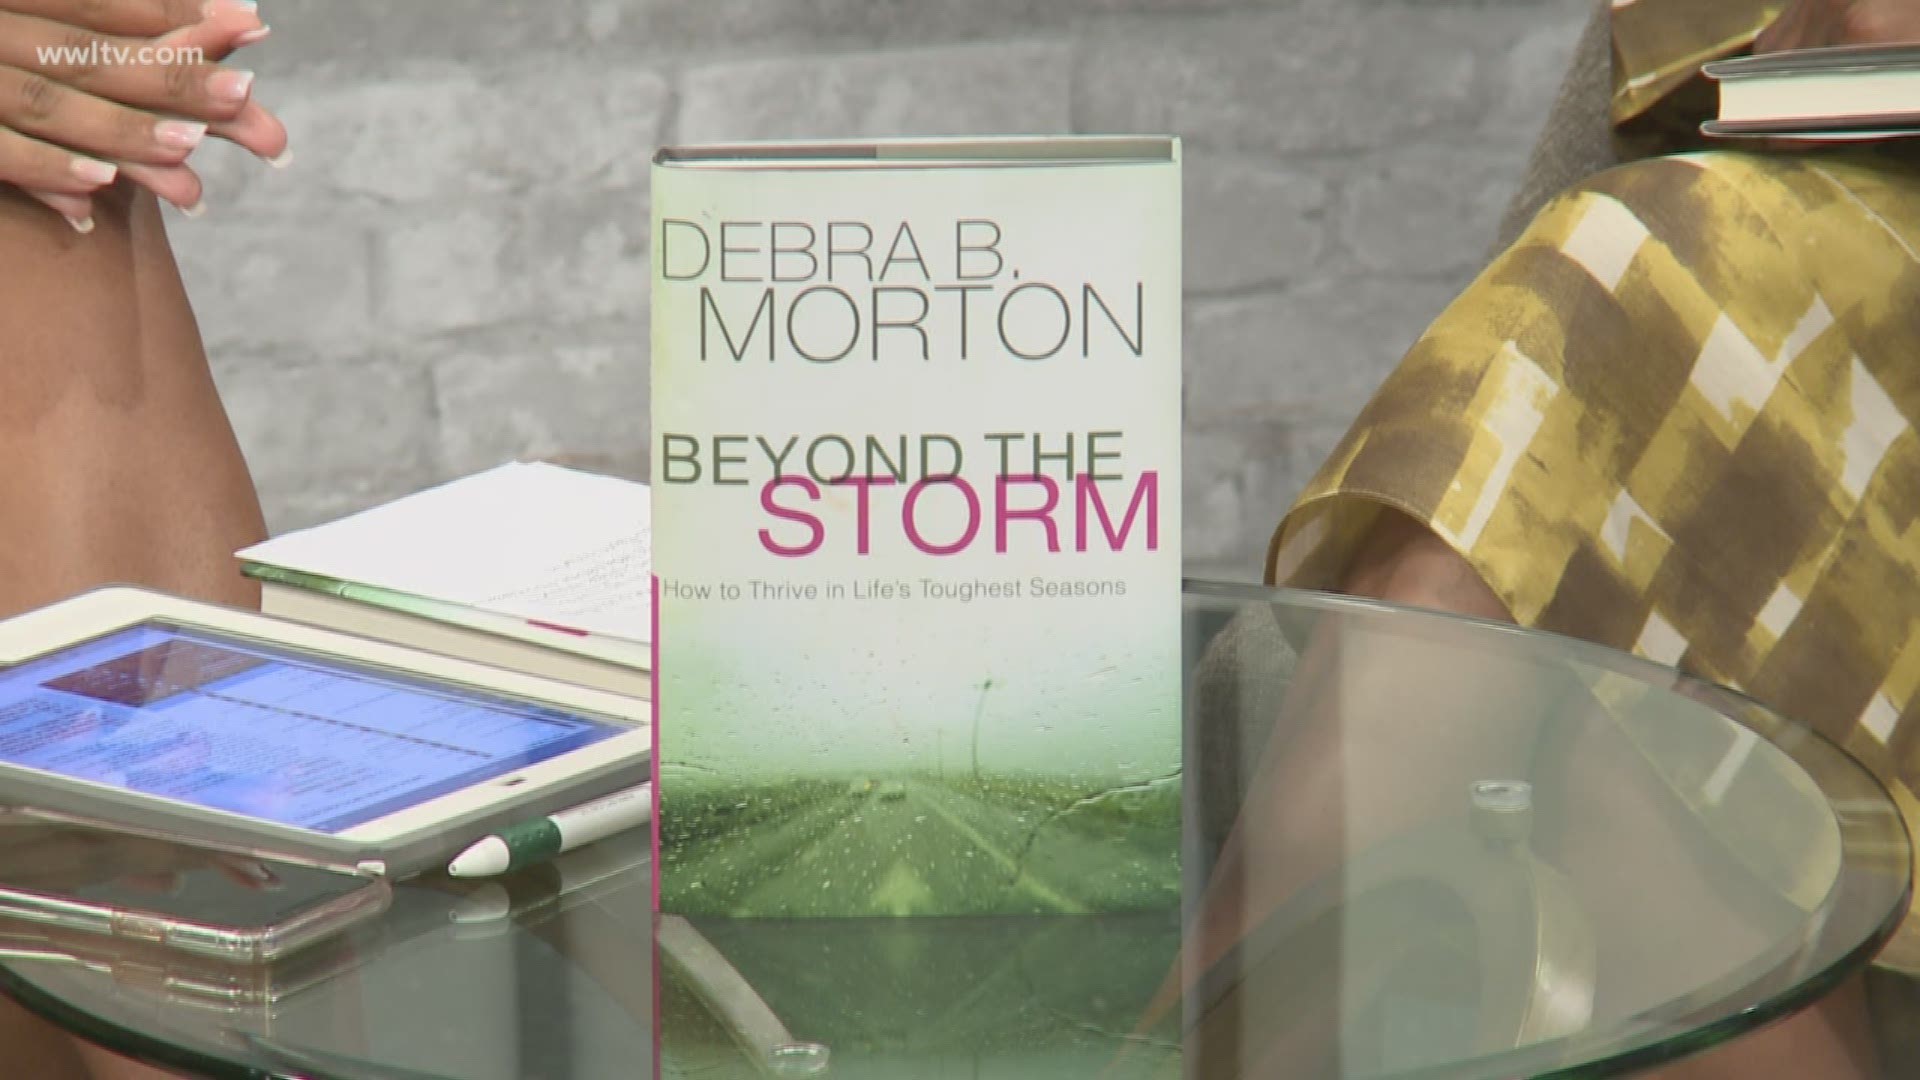 Sheba is shining a spotlight on some very talented local authors who's writings have a mission including Dr. Debra Morton and her new book that is looking to inspire people to thrive in tough situations.